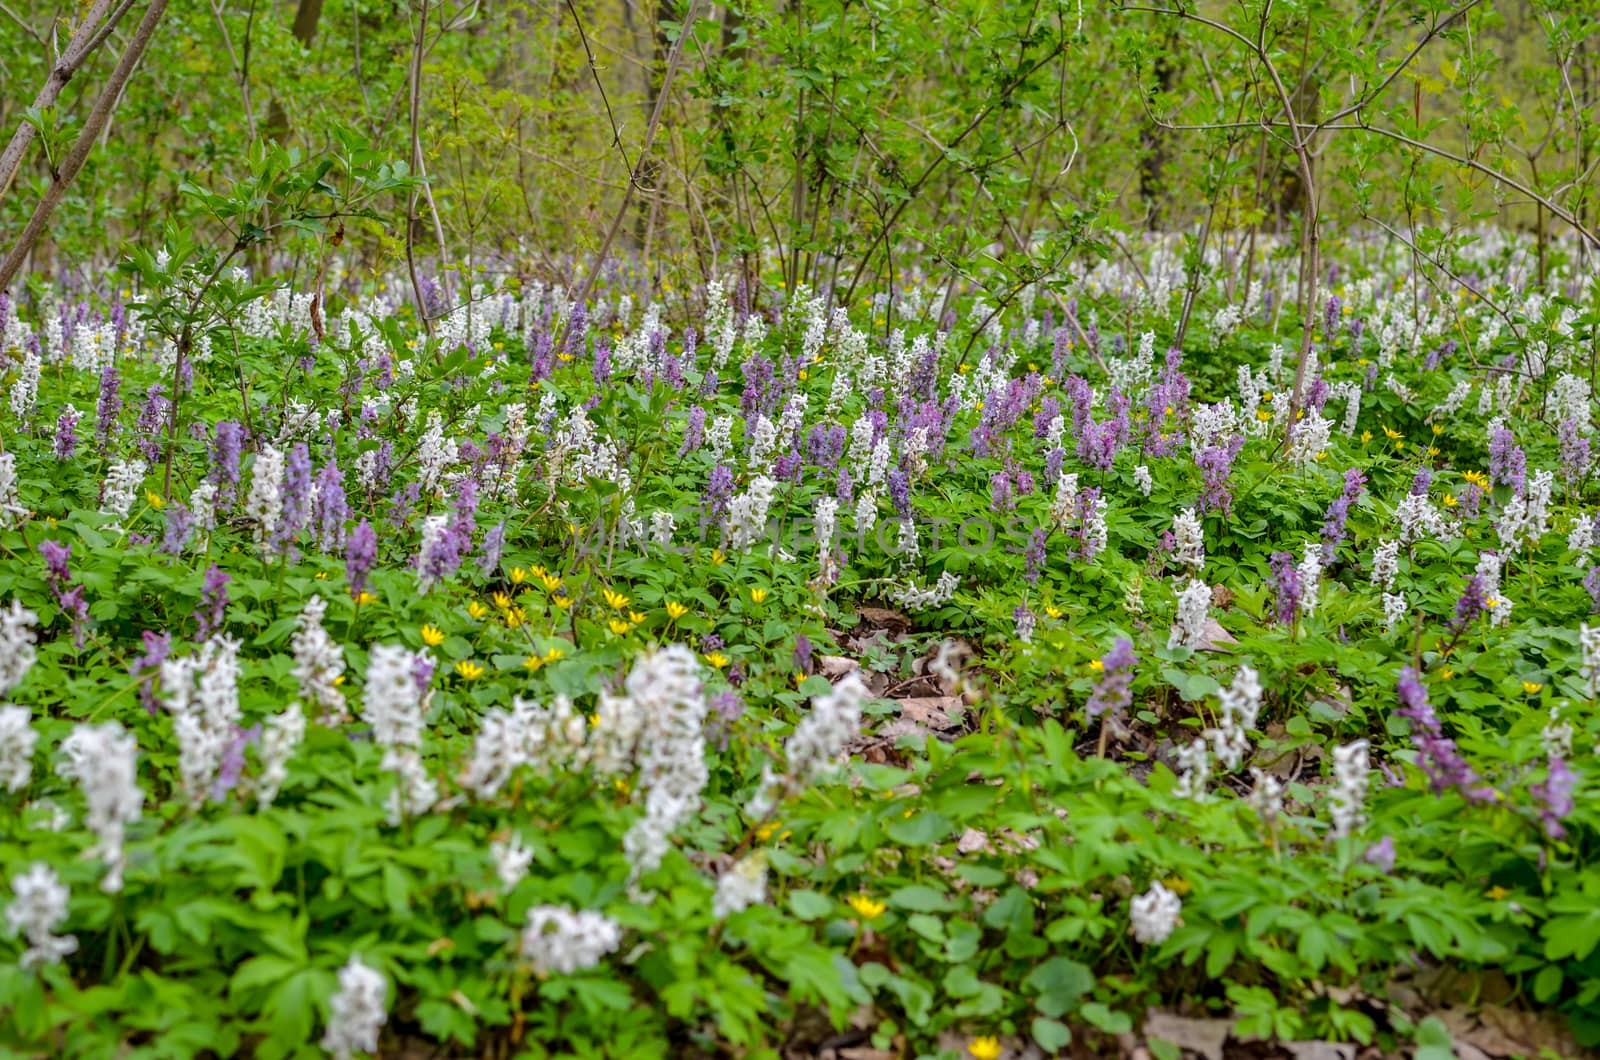 Scenic magical spring forest background of violet and white hollowroot Corydalis cava early spring wild flowers in bloom, with blurred trees in background